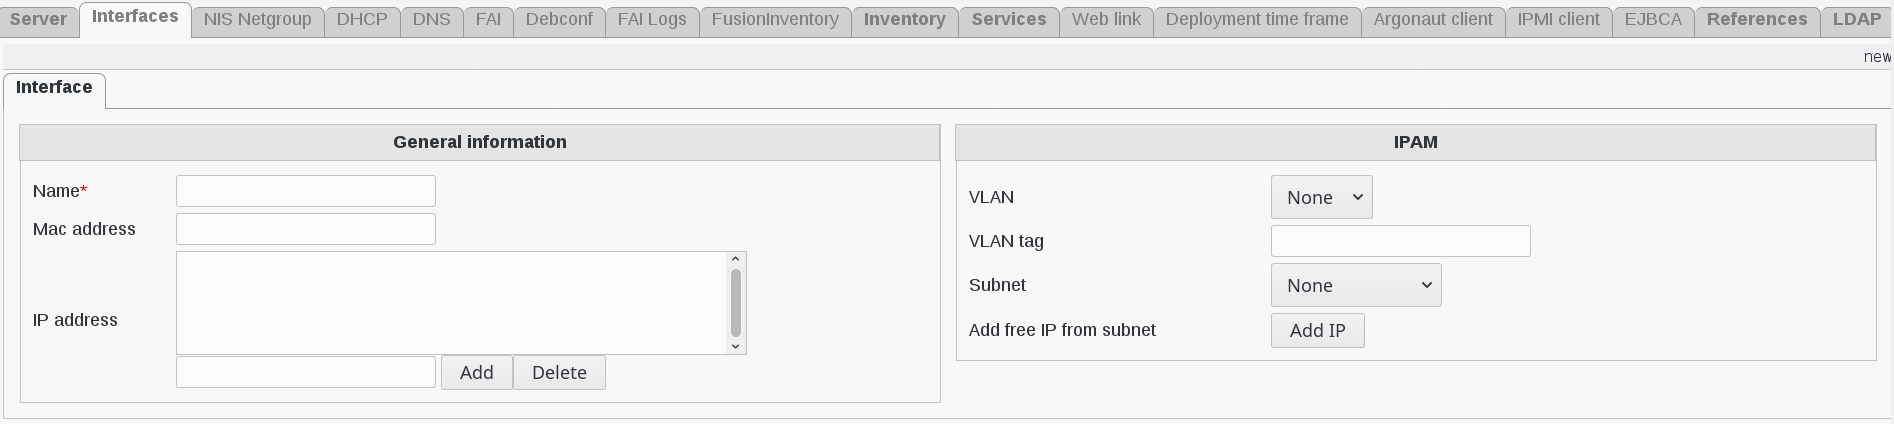 Picture of Ipam interface configuration menu in FusionDirectory